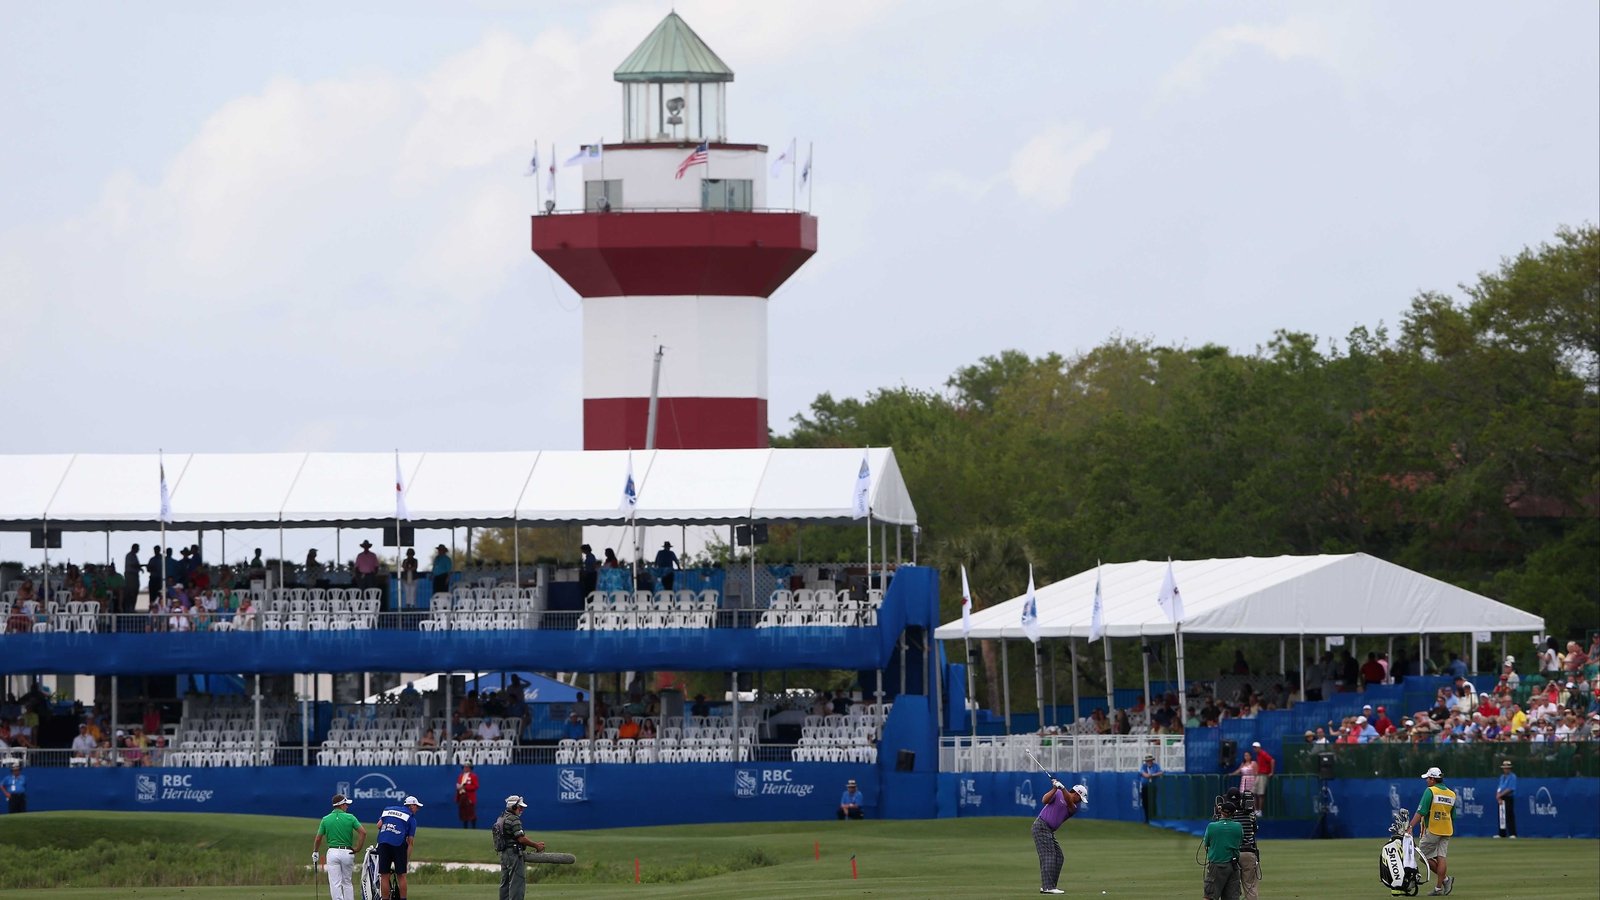 Davis leads RBC Heritage after round one